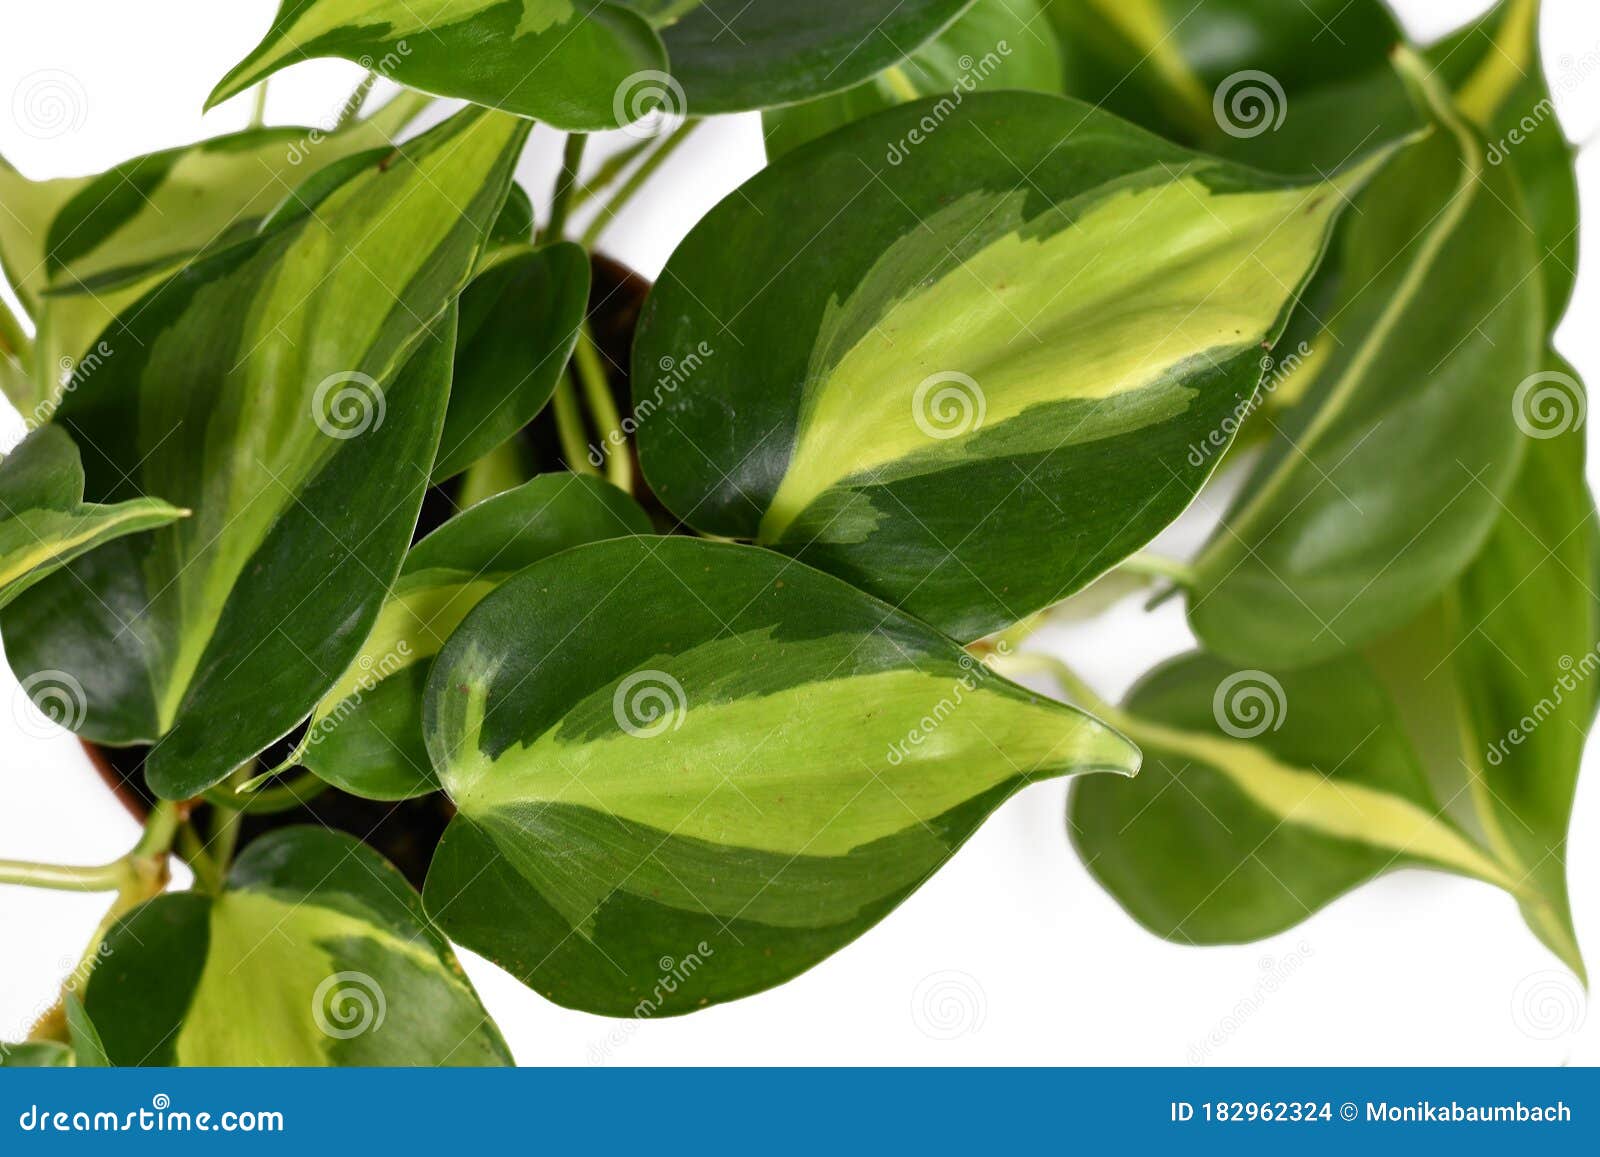 close up of tropical `philodendron hederaceum scandens brasil` creeper house plant leaves with yellow stripes on white background